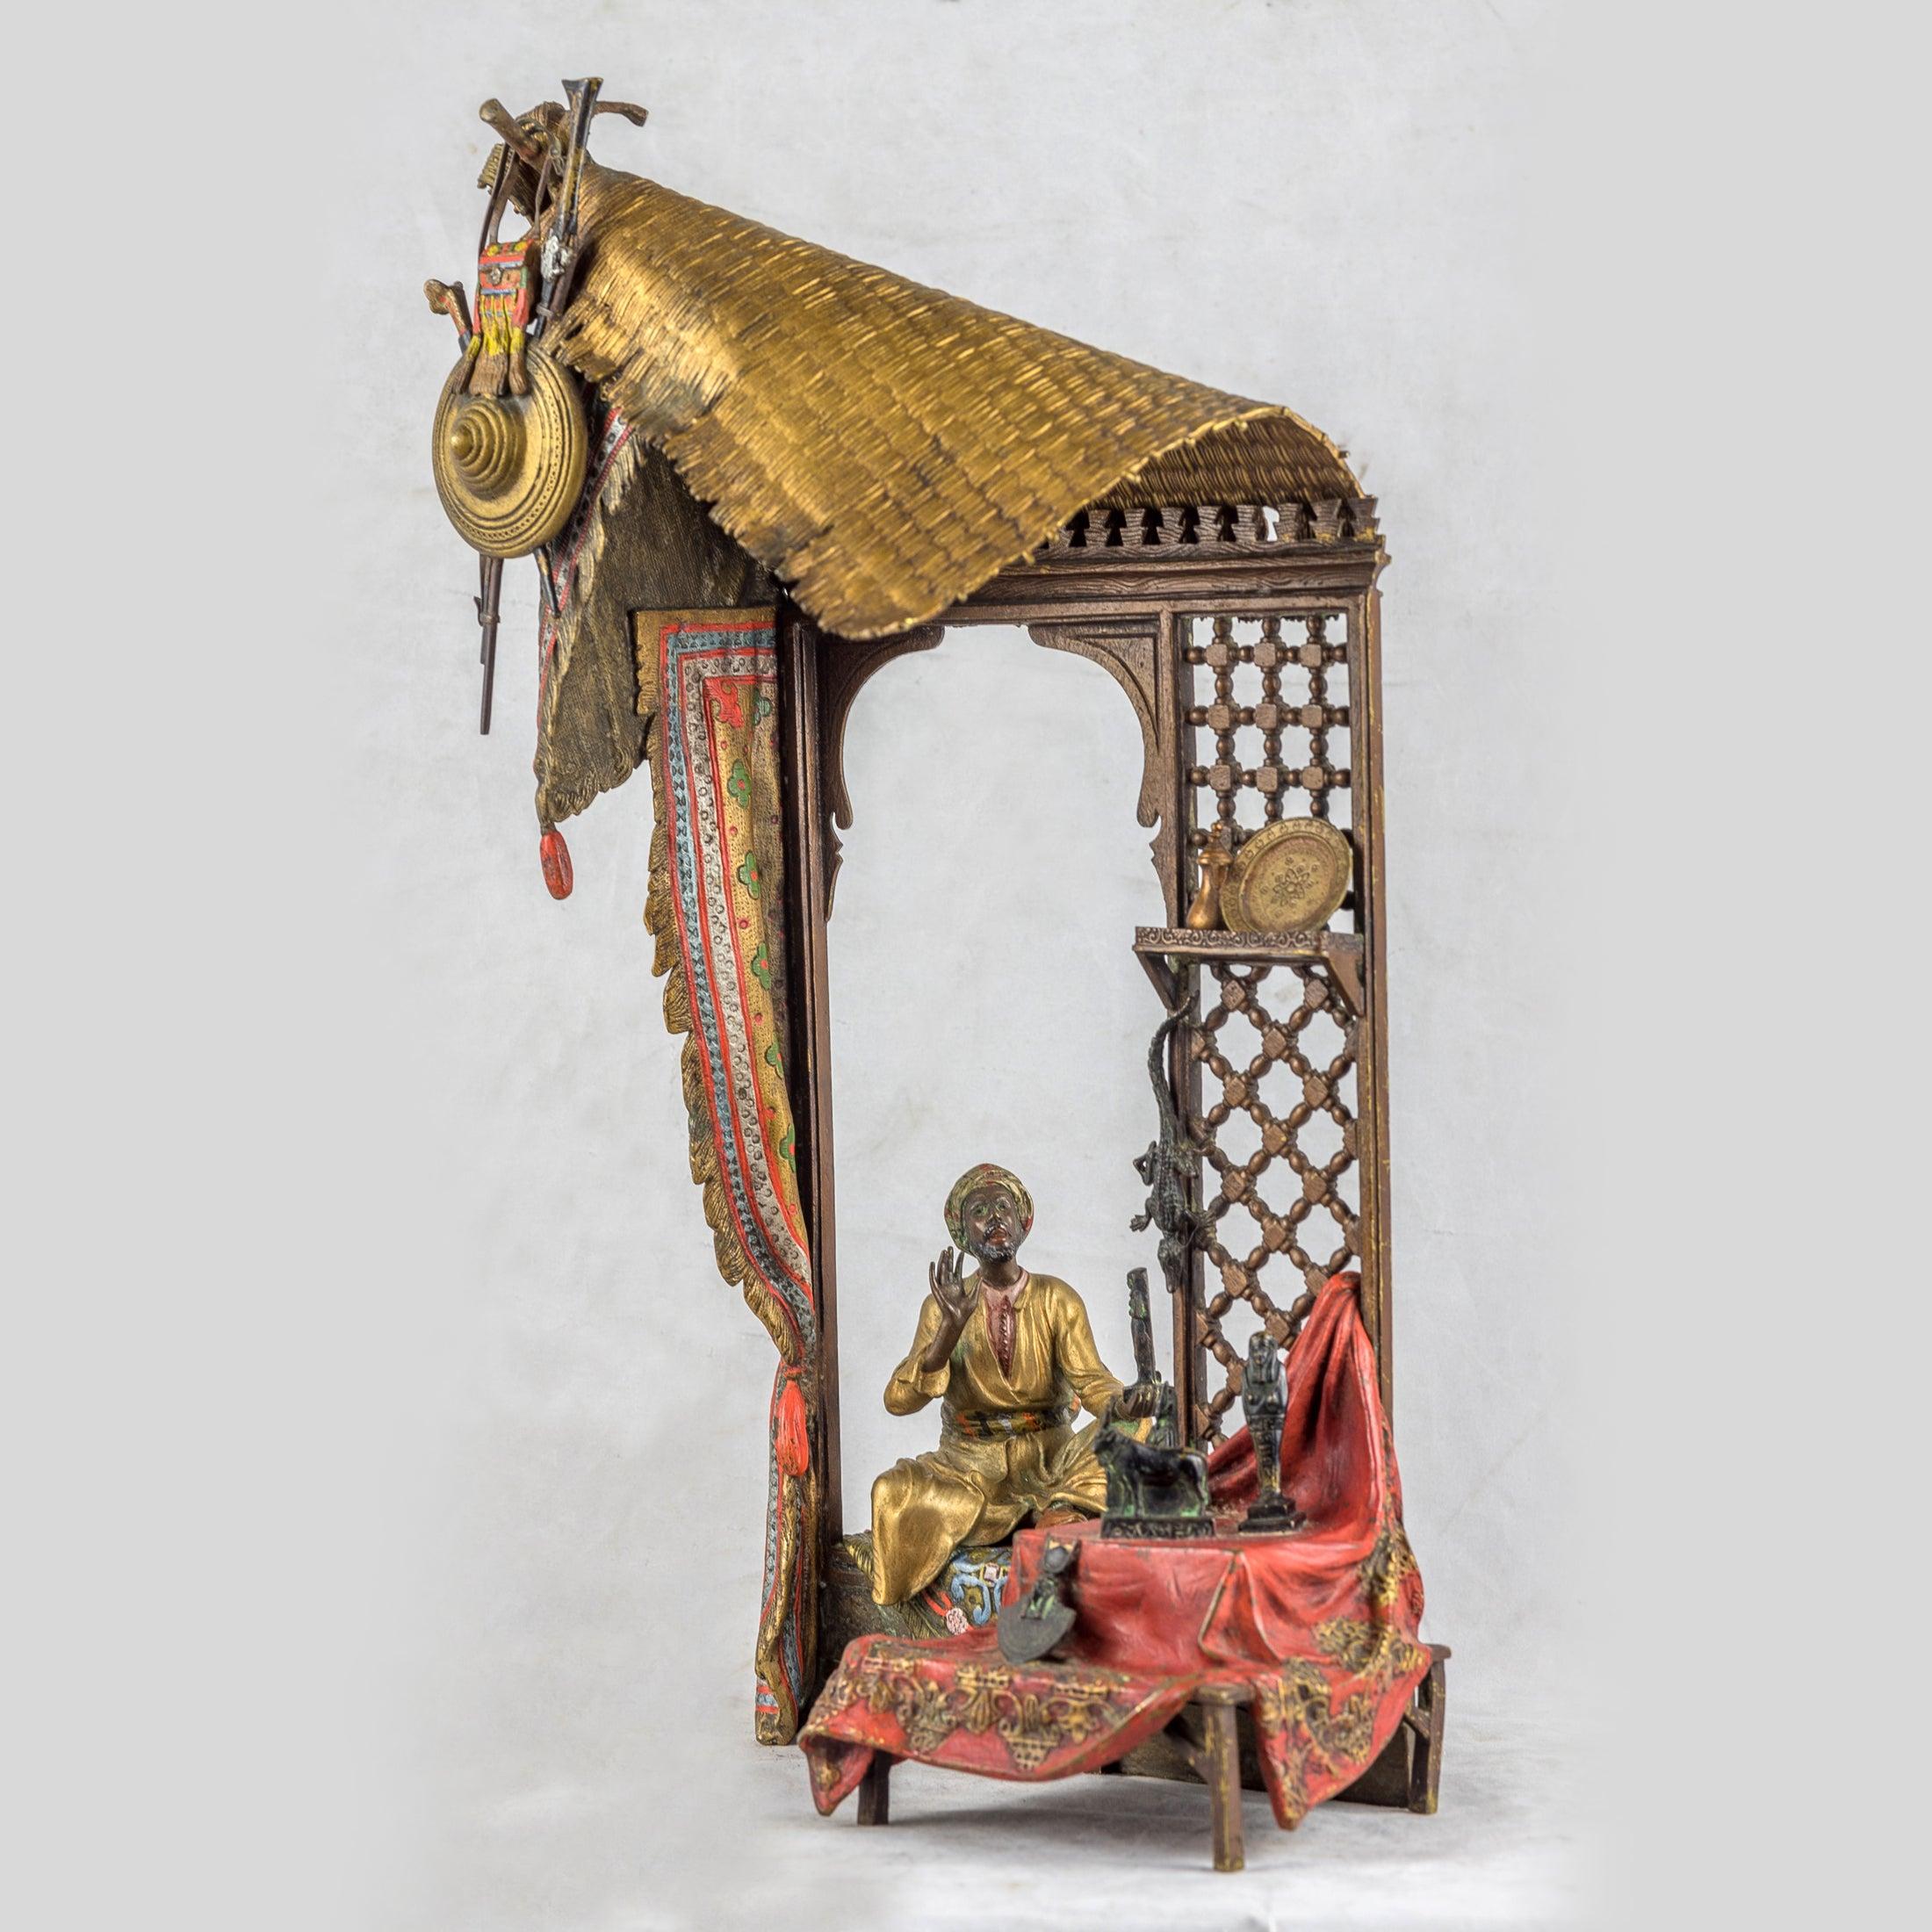 Franz Bergmann
Austrian, (1861-1936)

A fine quality Austrian cold-painted bronze table lamp and sculpture depicting an Arab merchant, stamped to reverse with Bergmann Foundry mark and 